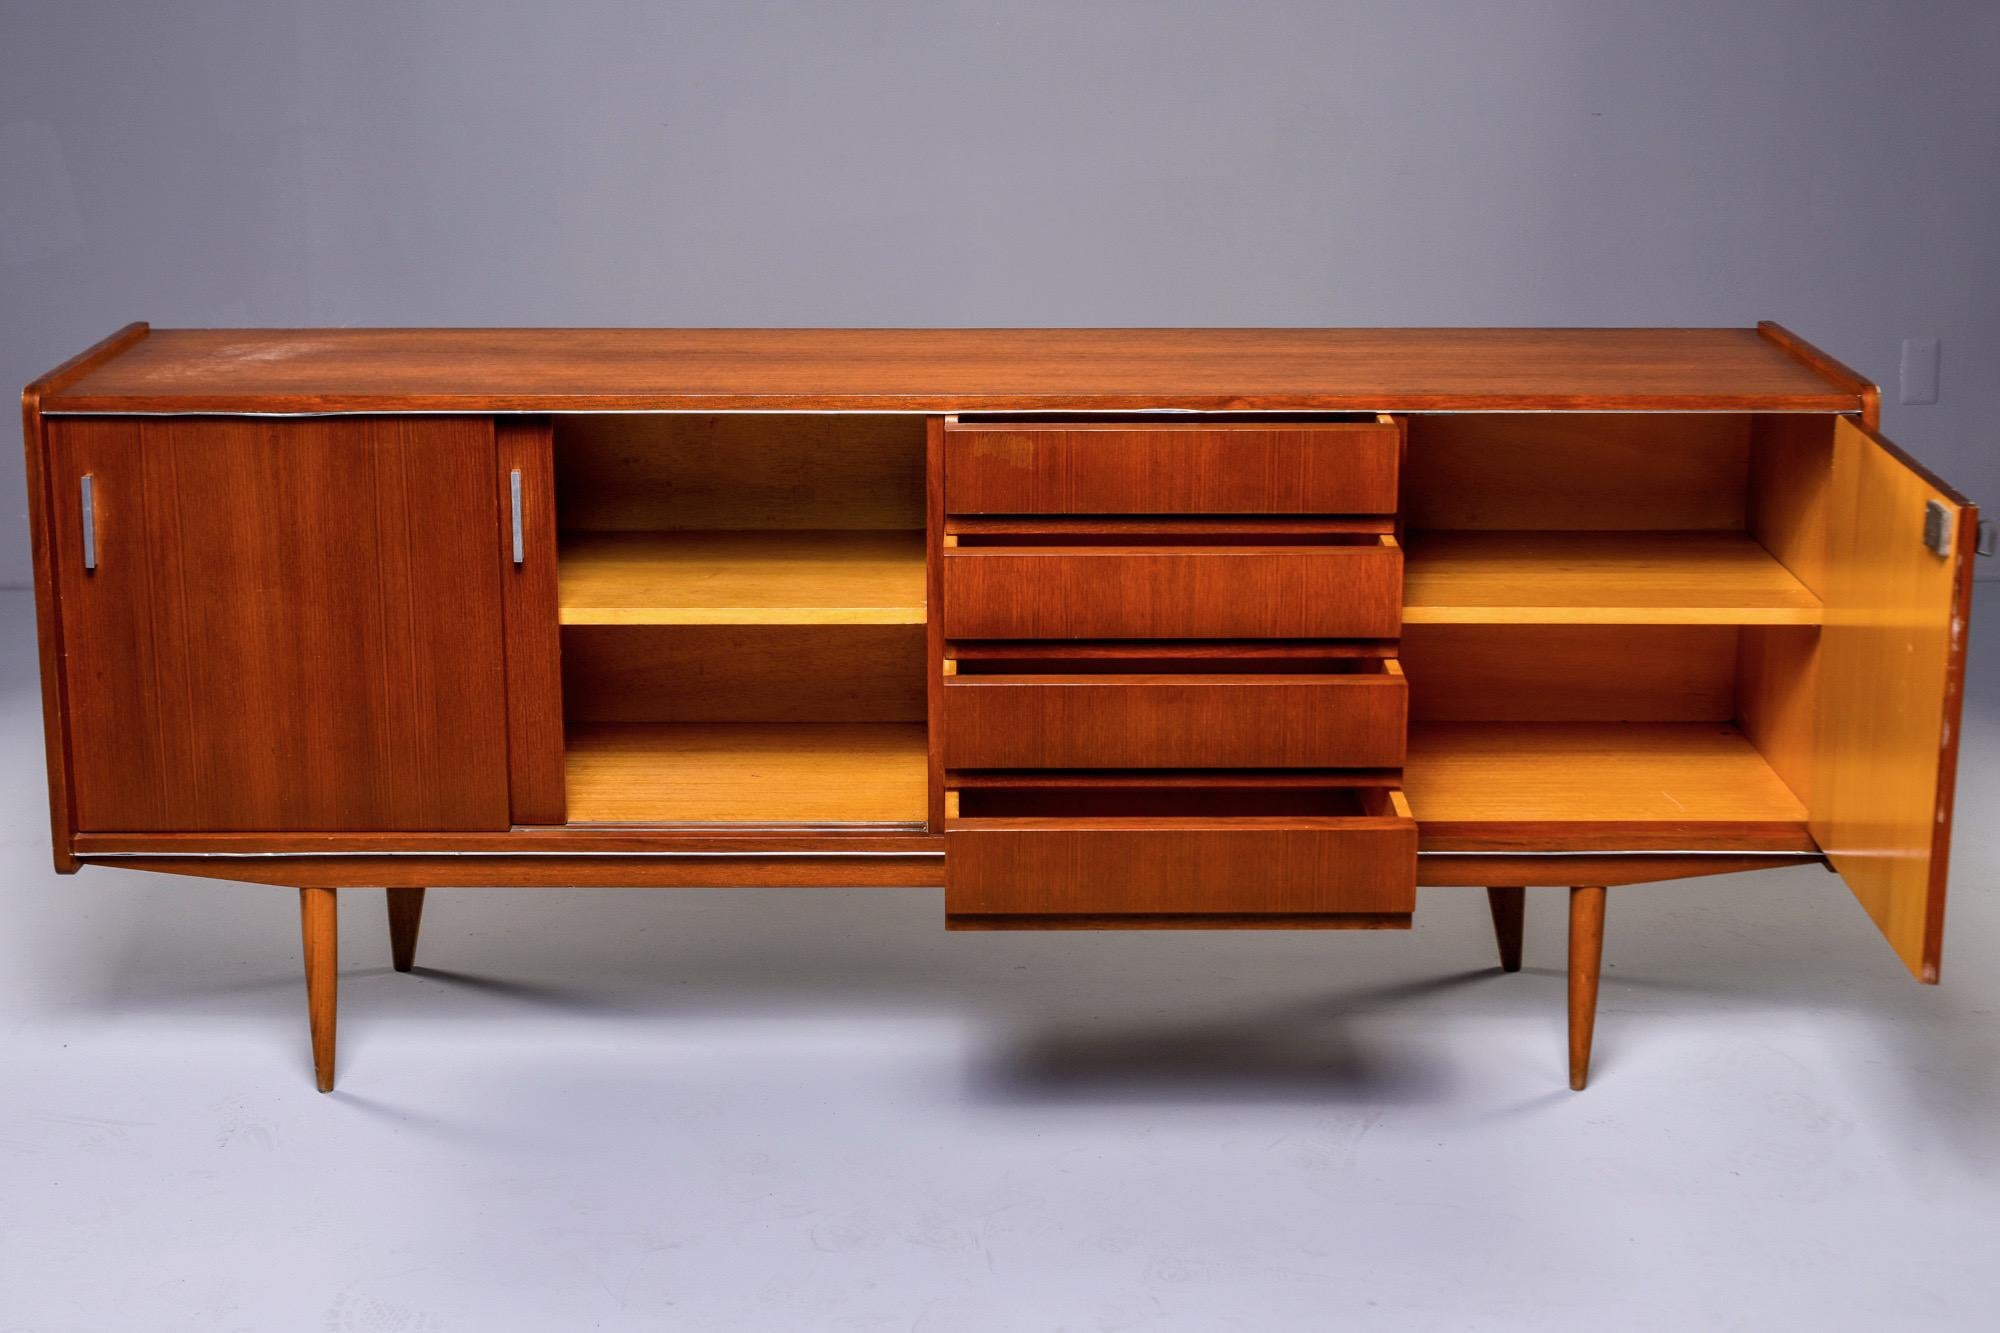 Circa 1960s French teak wood buffet or credenza with section of four drawers with dovetail construction flanked by storage compartment with hinged door and a larger compartment with sliding doors and single internal shelf. Tapered legs. Unknown